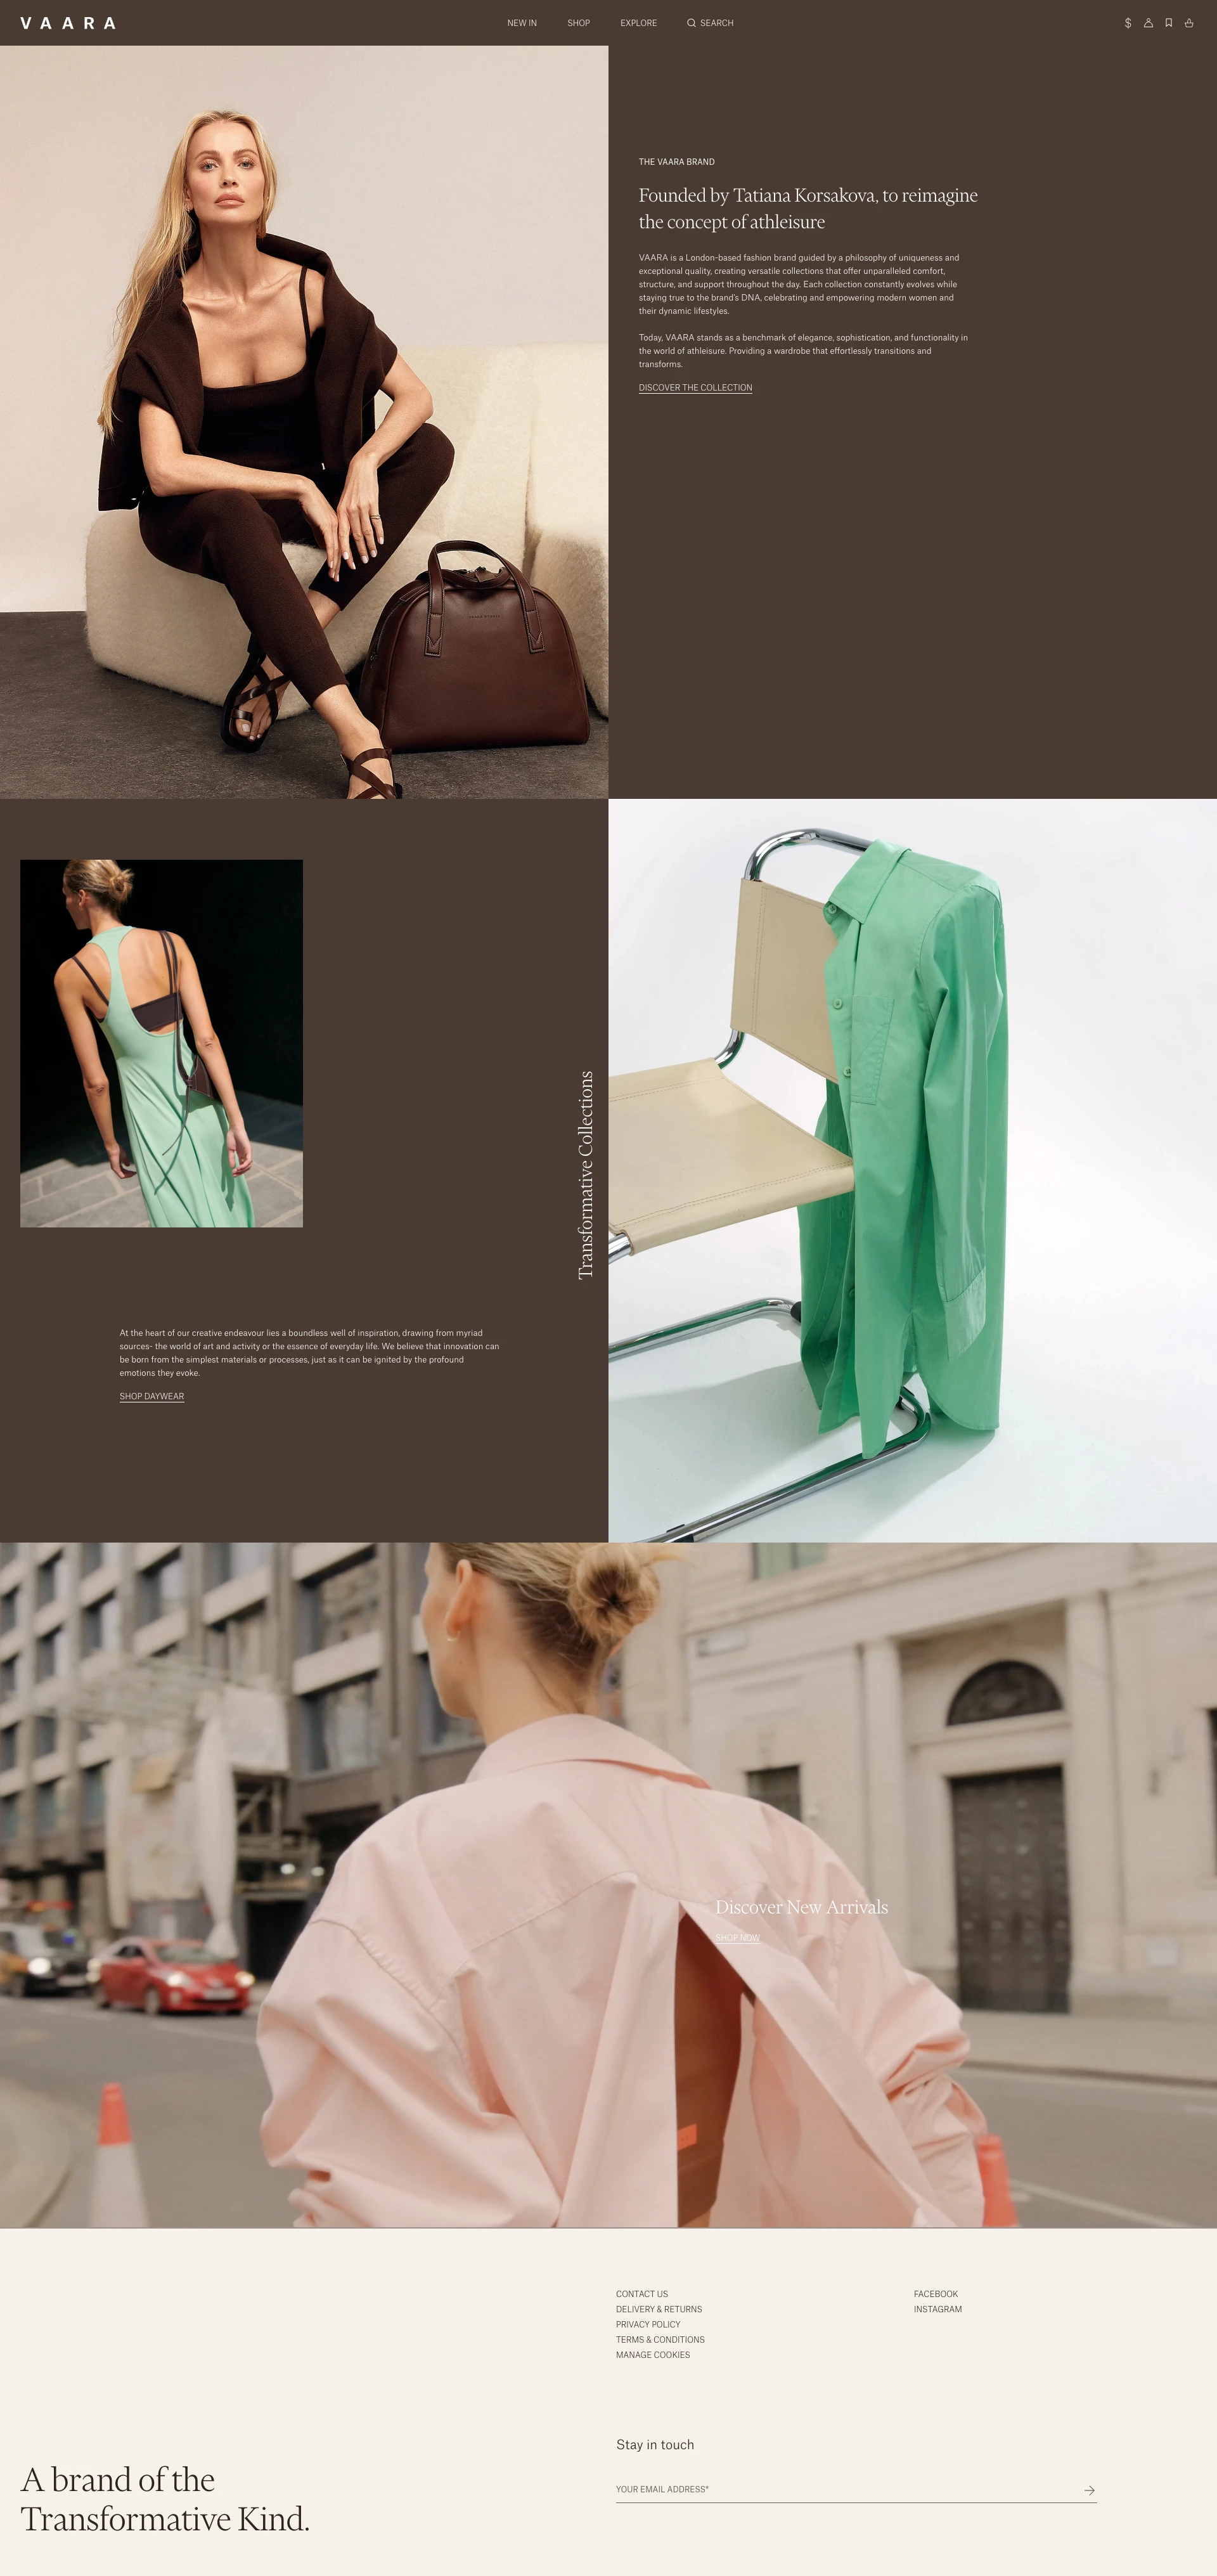 VAARA Landing Page Example: VAARA was founded by Tatiana Korsakova to develop exceptional multifunctional womenswear. Collections that seek to transcend the traditional ideas of athleisure.